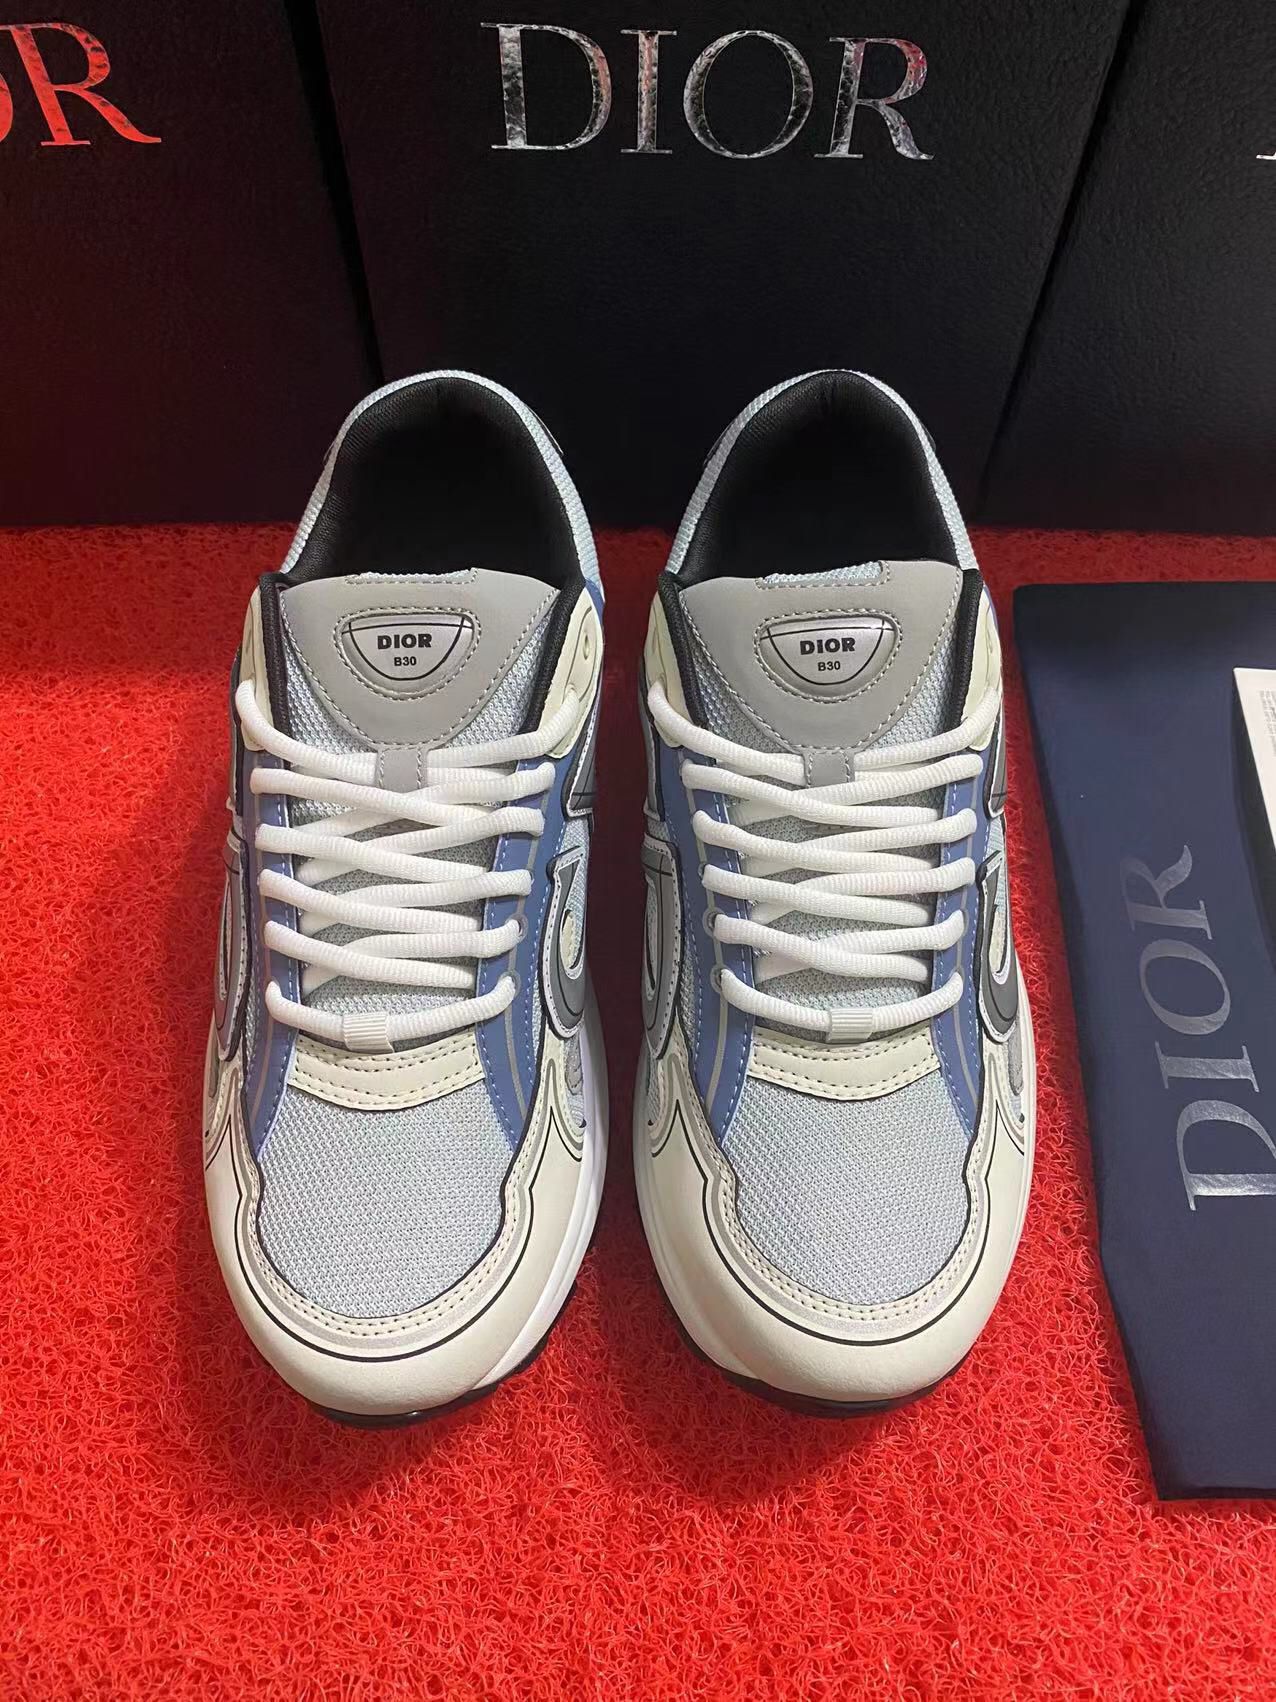 Dior Shoes Sz 11 B30 for Sale in New York, NY - OfferUp